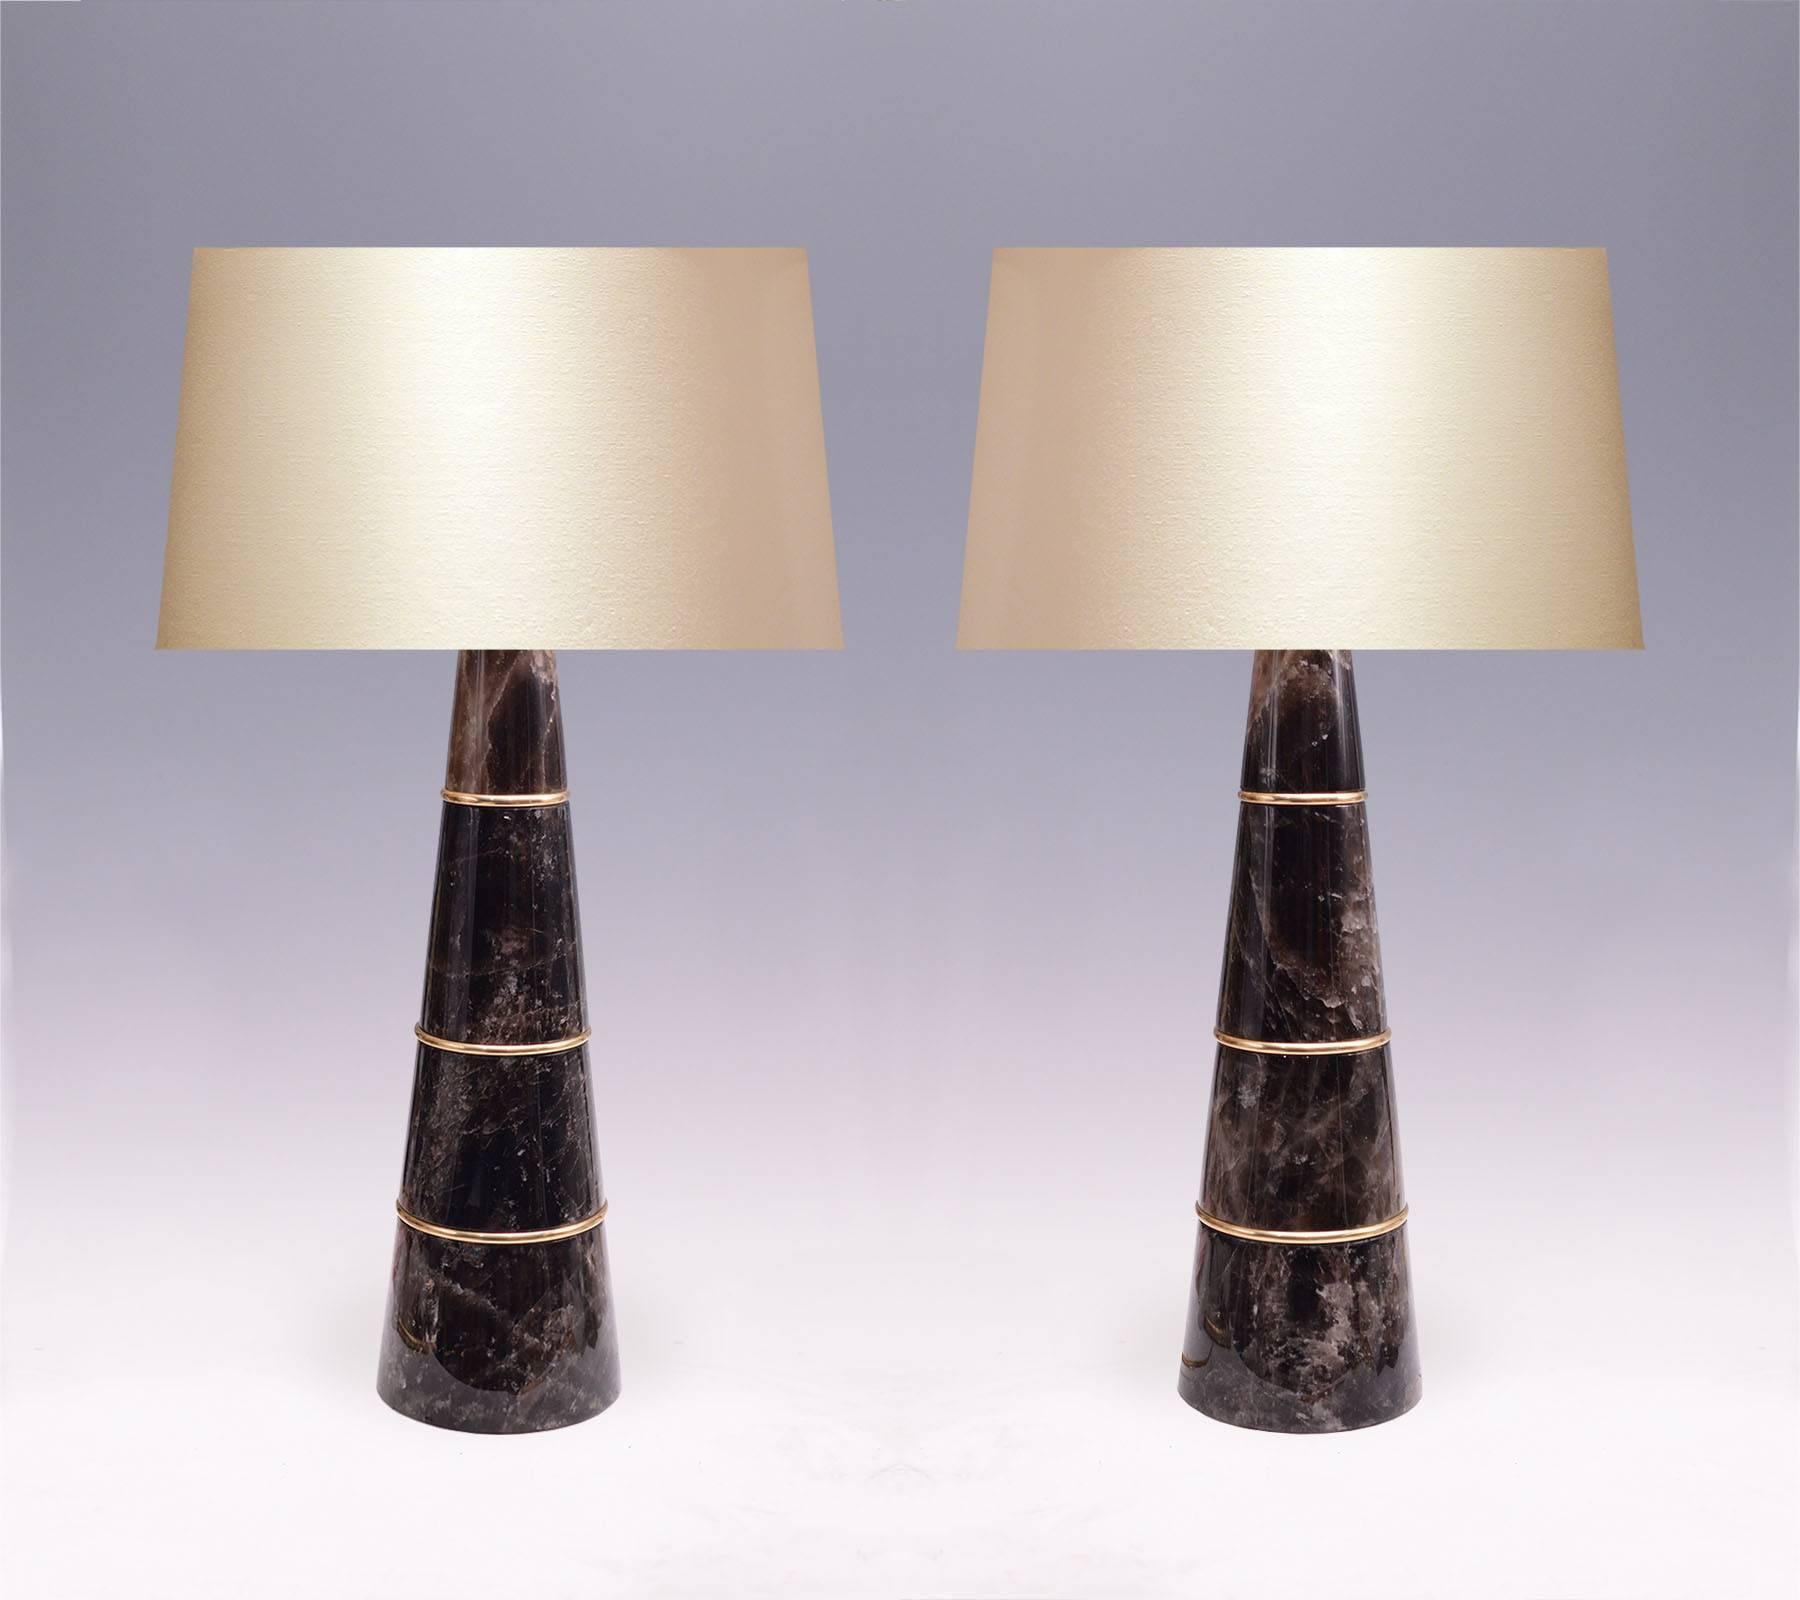 fine carved cone shape dark rock crystal quartz lamps with polished brass inserts, created by Phoenix Gallery, NYC.
To the rock crystal: 22.75